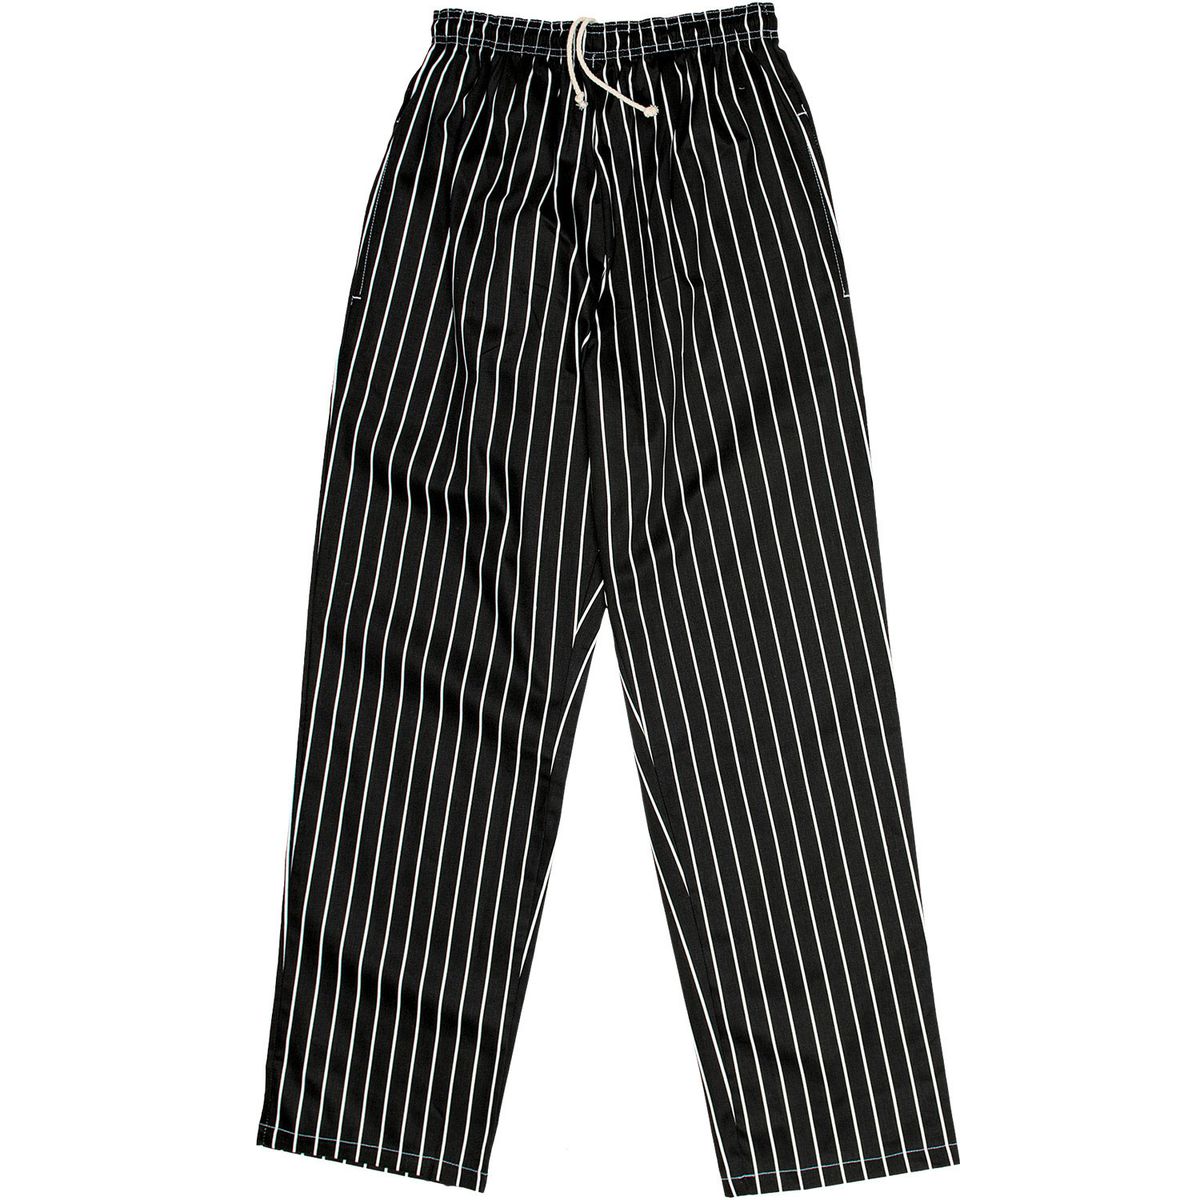 Javlin - Chef Trouser- Black and White Chalk Stripe | Shop Today. Get ...